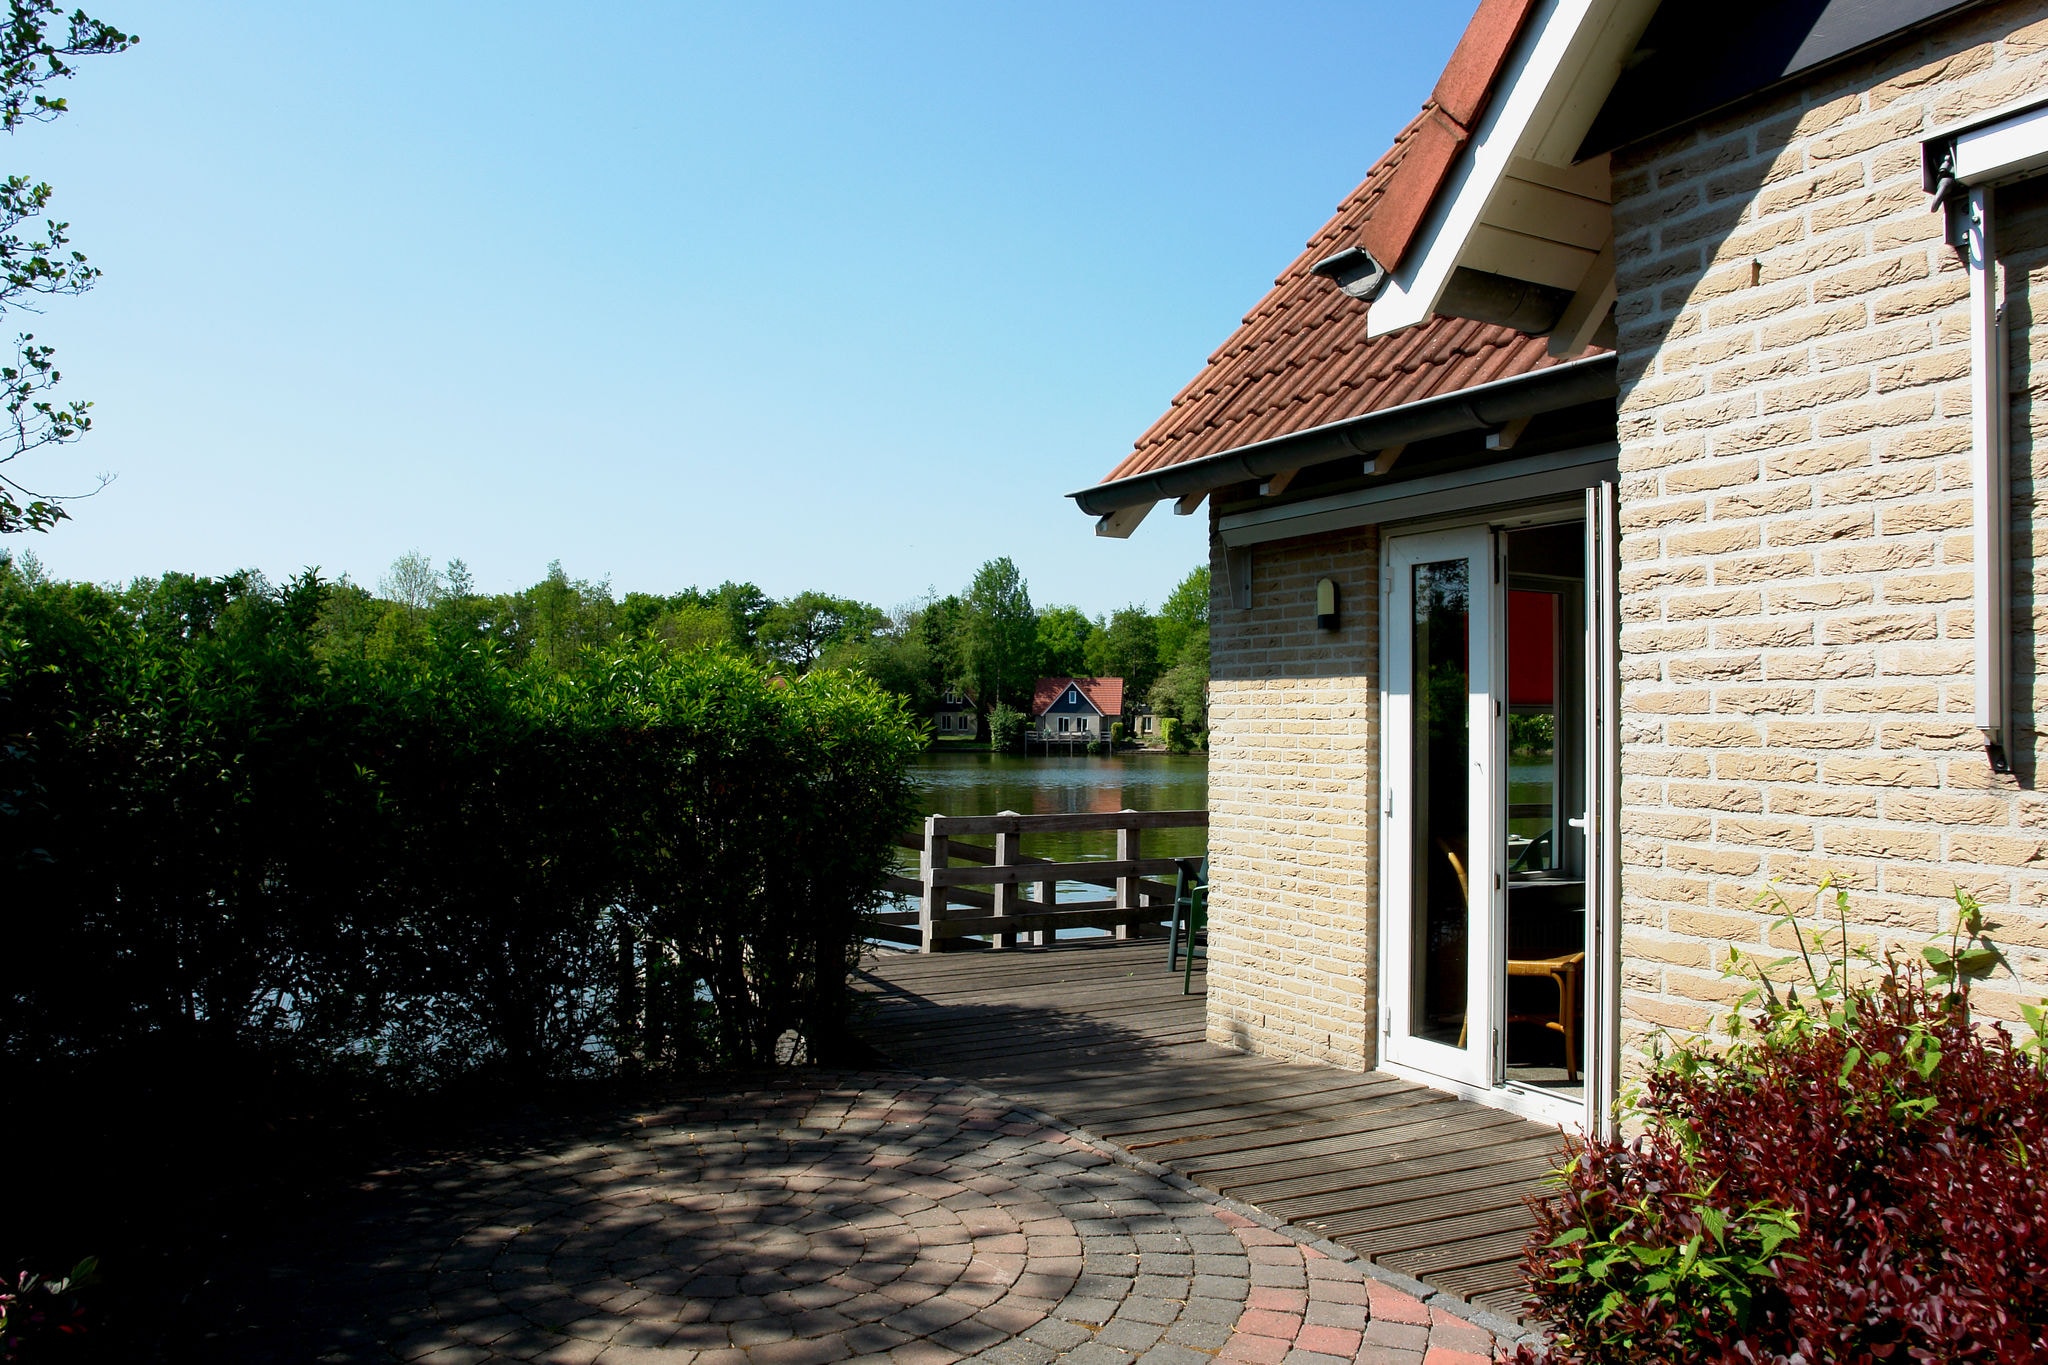 Detached holiday home with WiFi, 20km van Assen